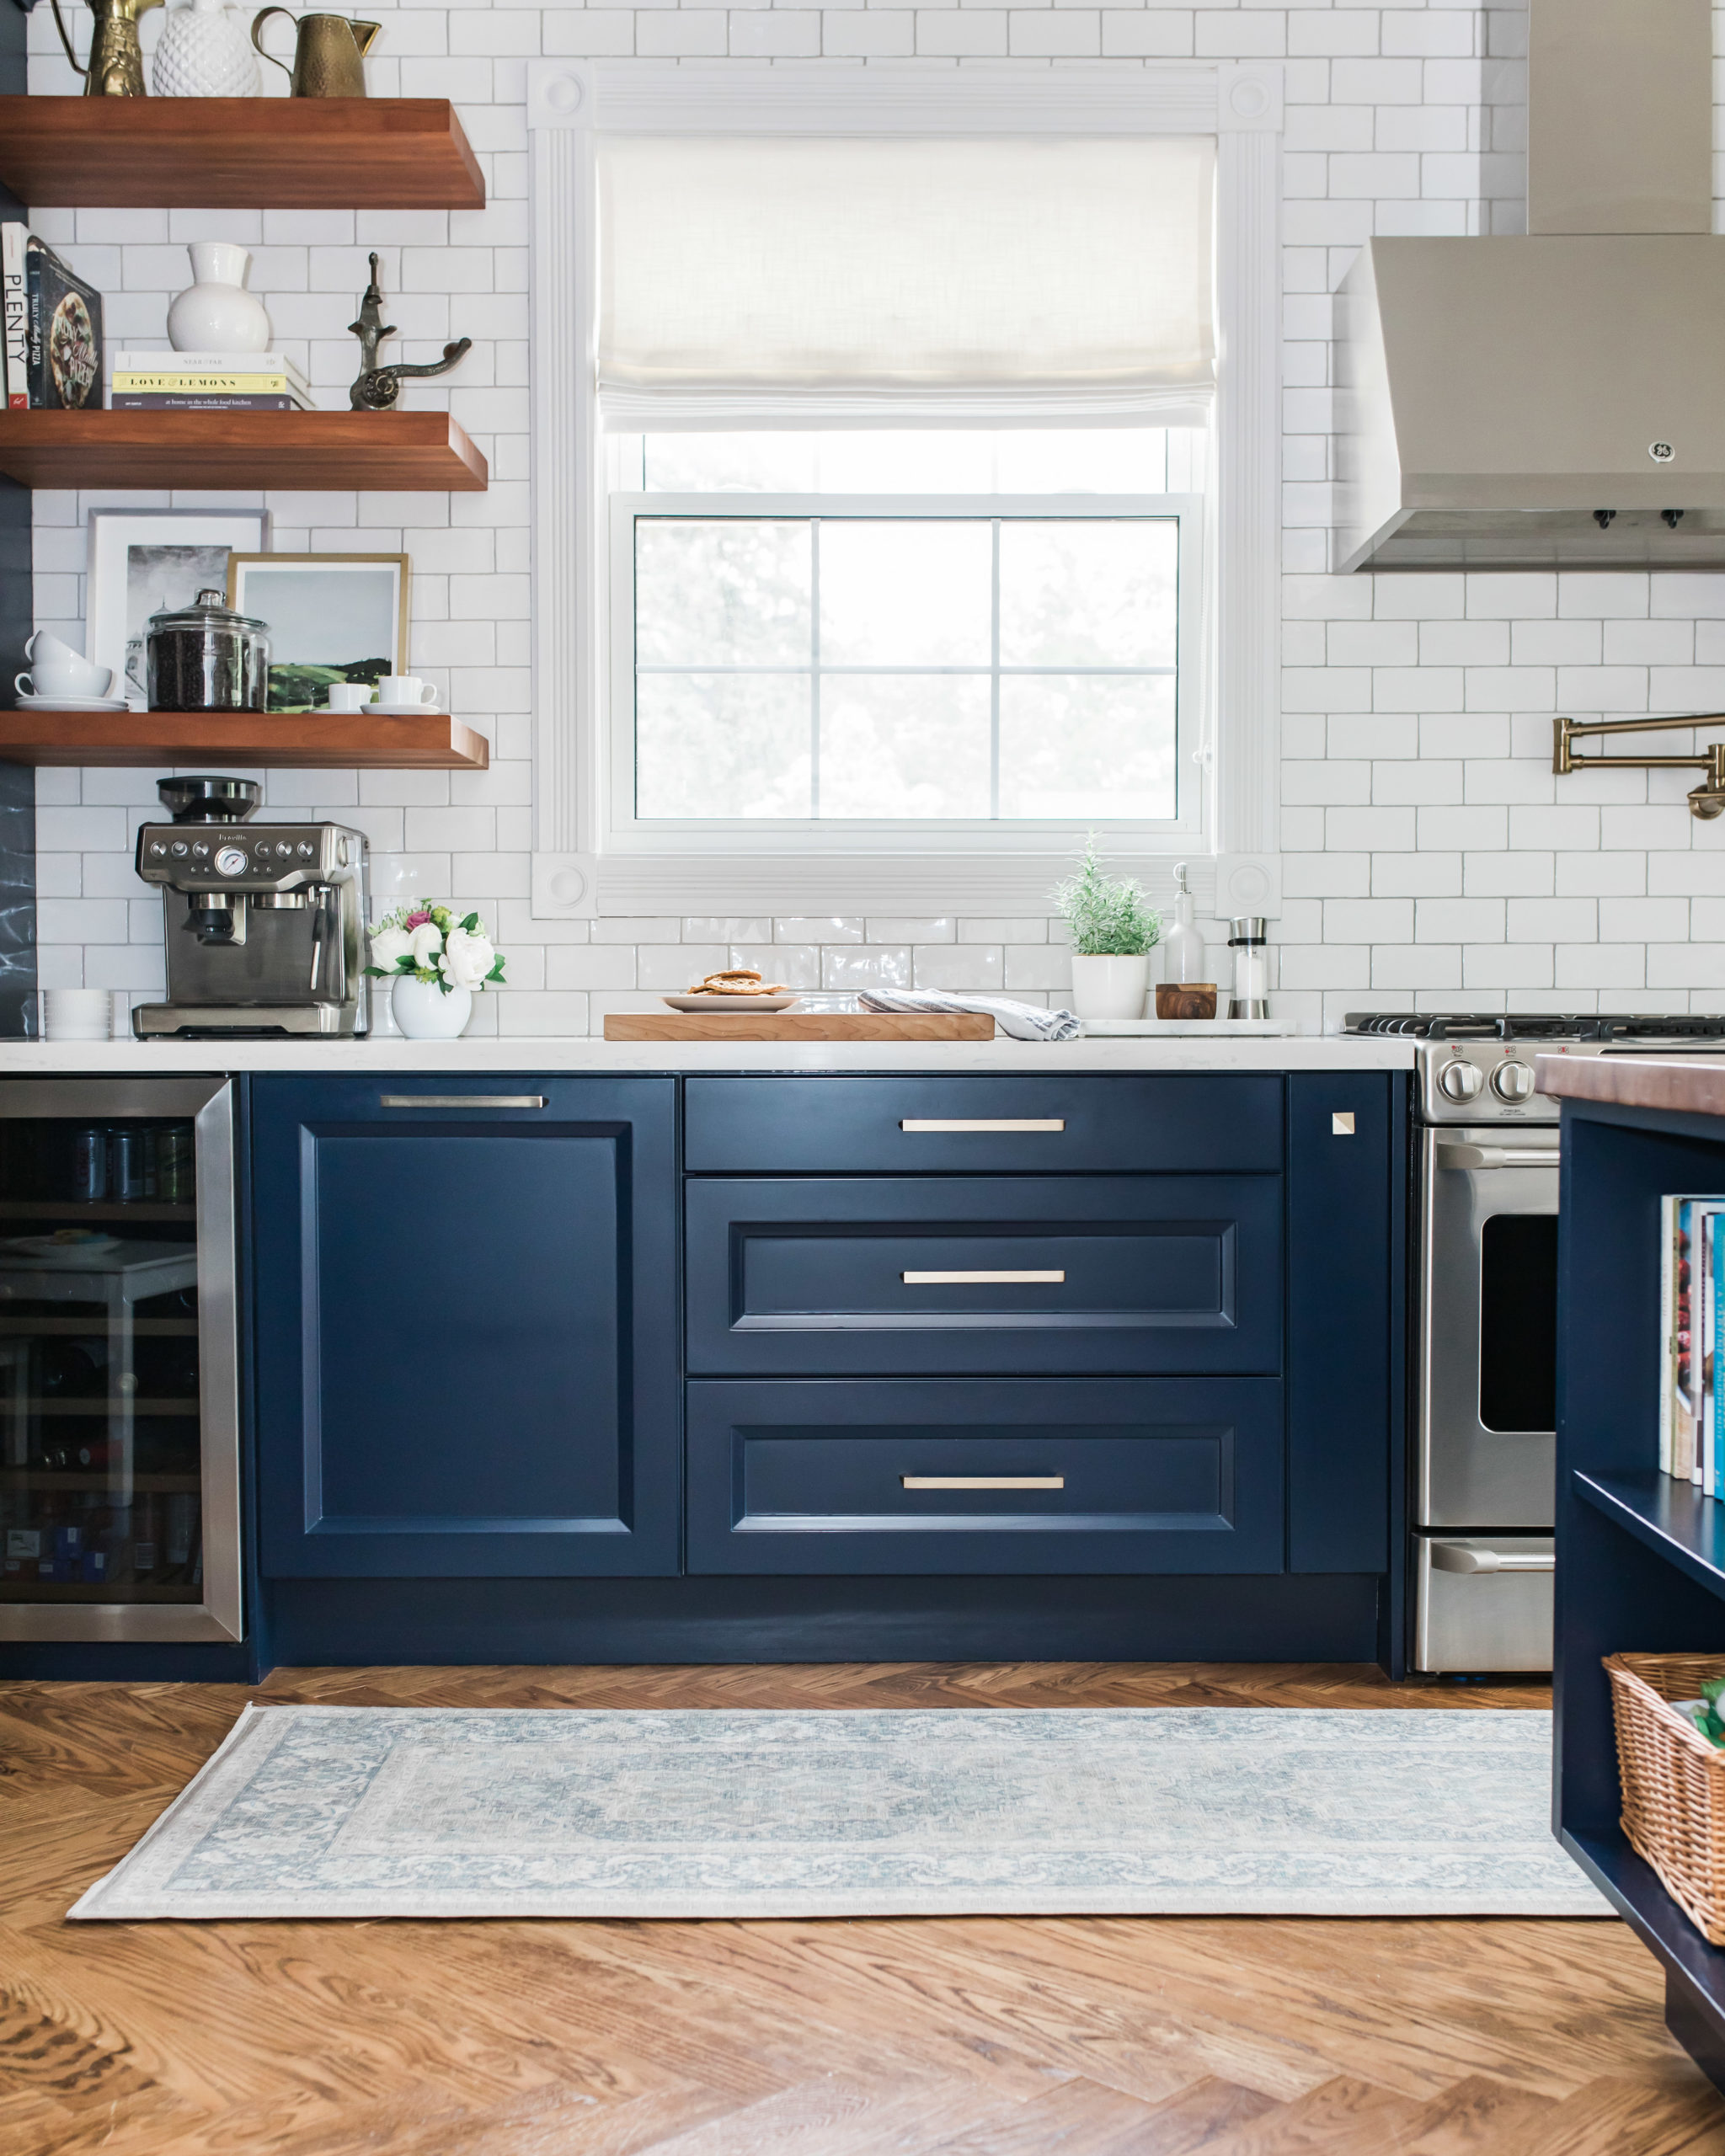 interior designer's kitchen with navy cabinets, gold hardware, and Persian inspired runner